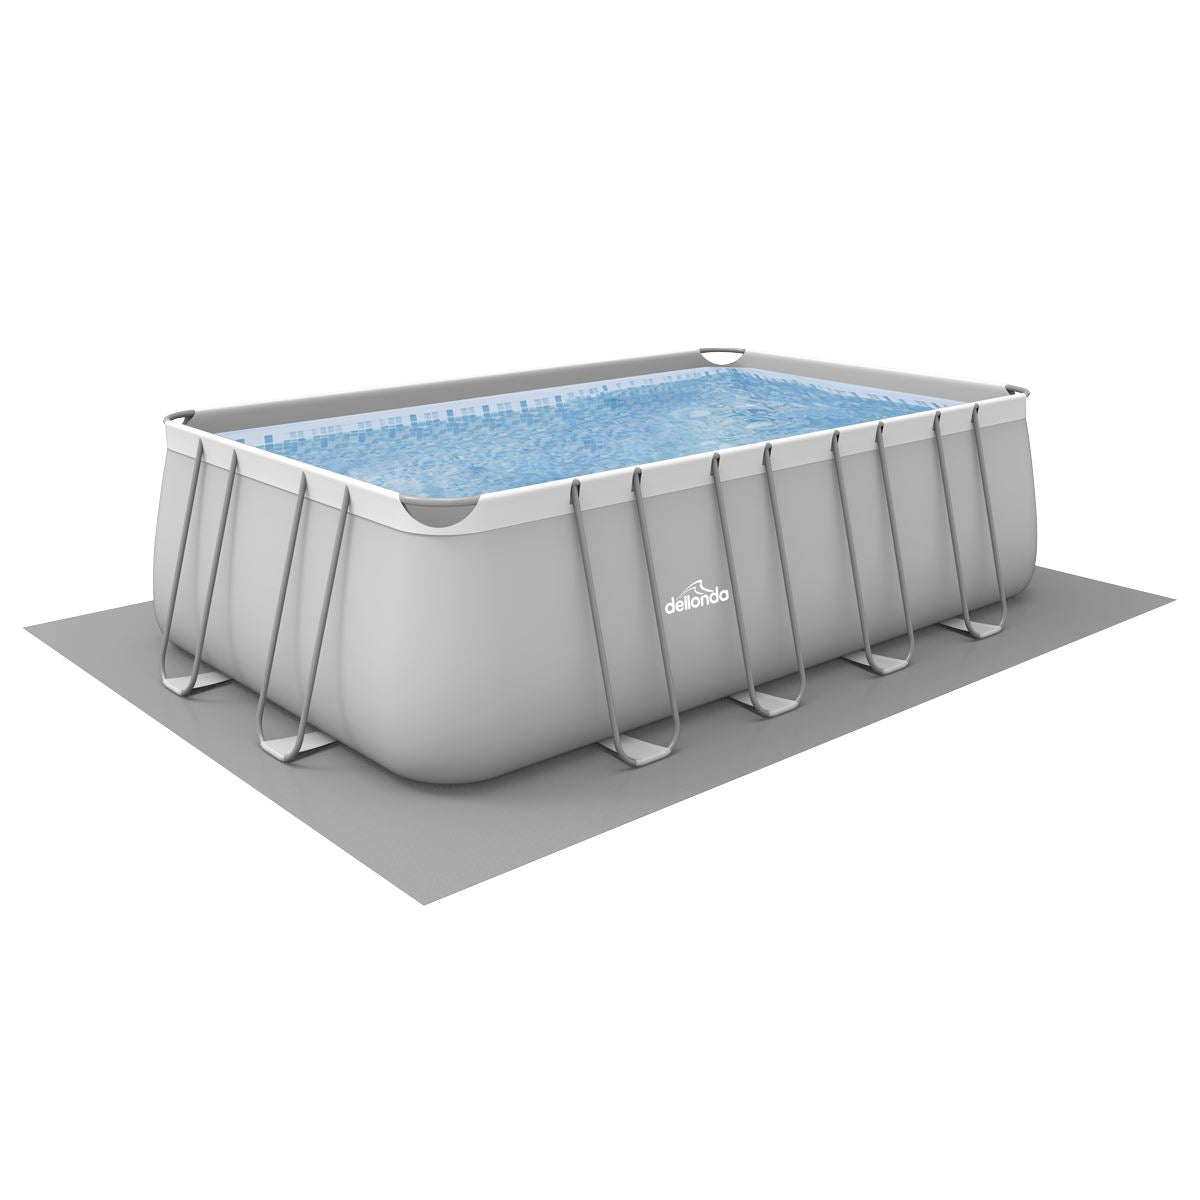 Dellonda 18ft Deluxe Steel Frame Swimming Pool, Rectangular with Filter Pump